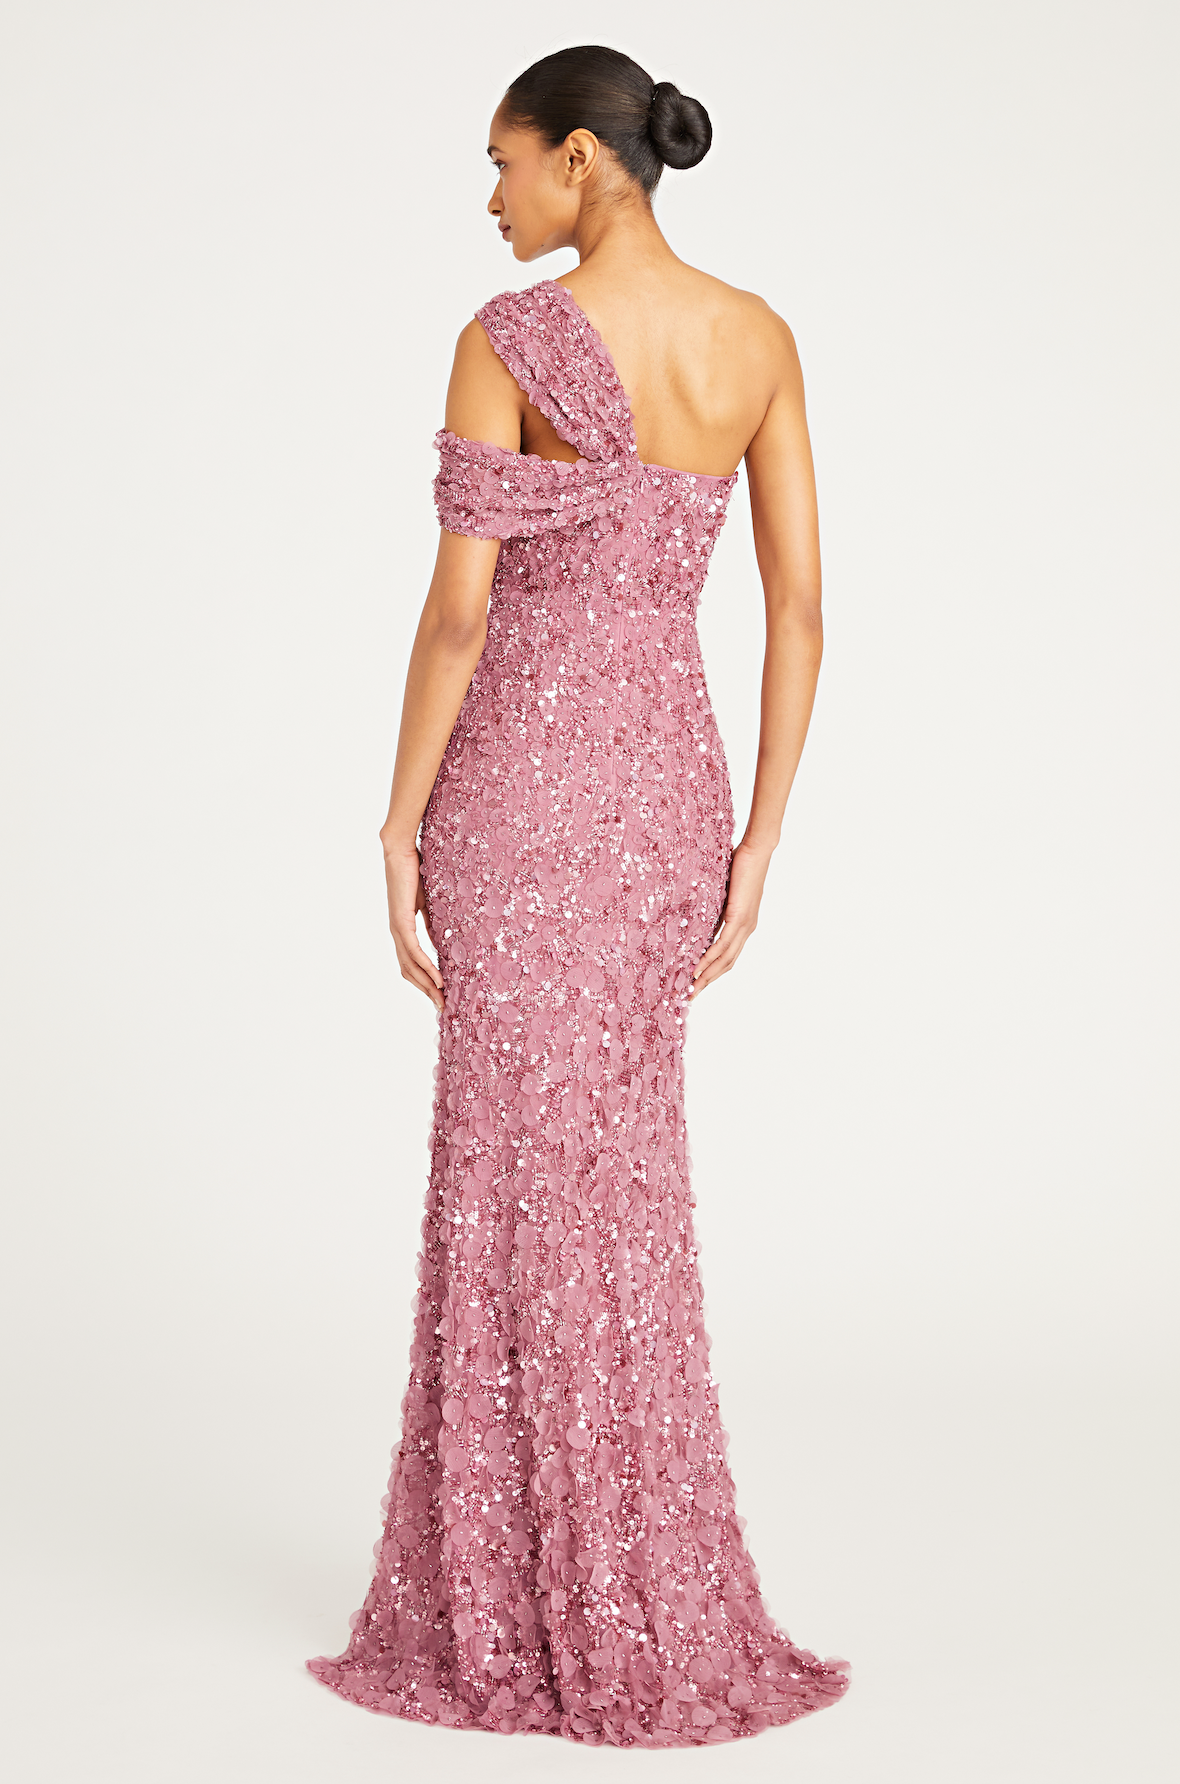 Theia 8819883 One-Shoulder Beaded Gown, a stunning gown featuring intricate beadwork and 3D flower petals, ideal for special occasions and mothers of the bride or groom.